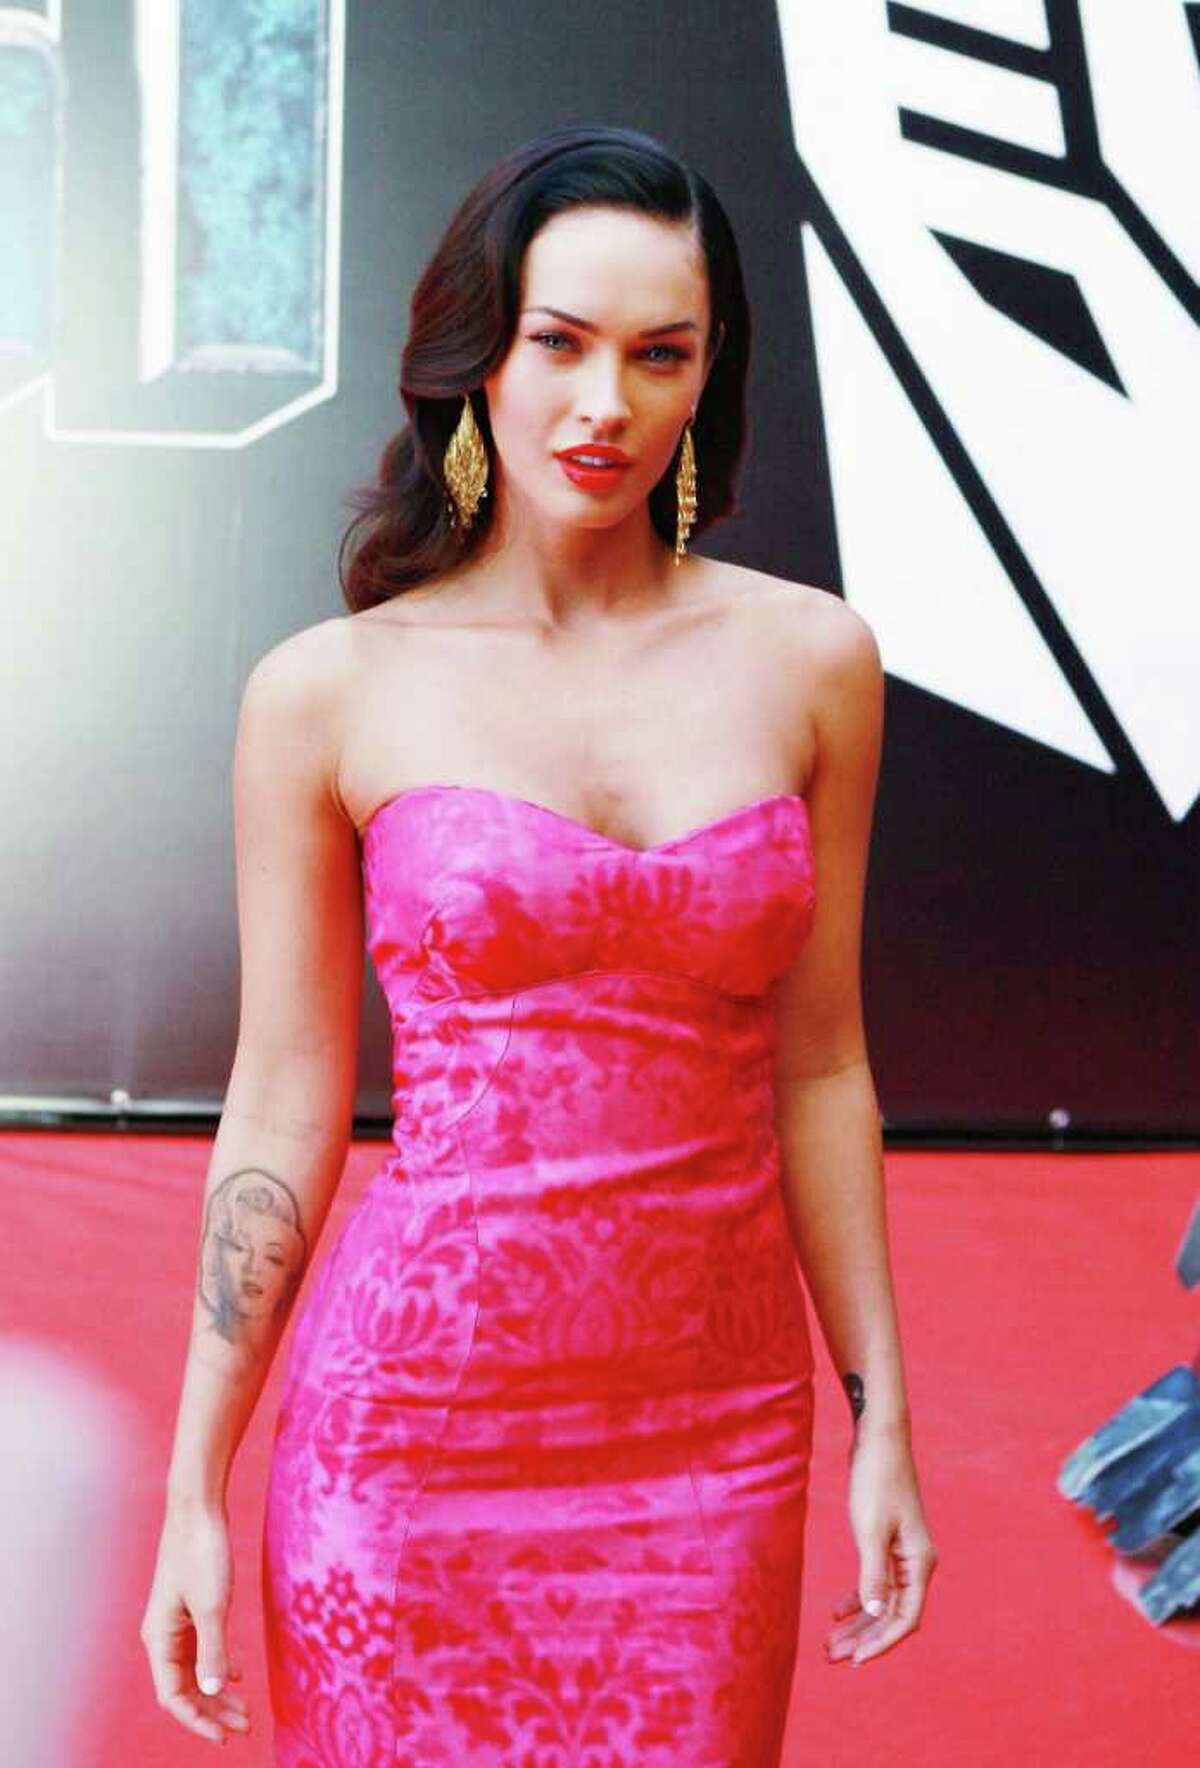 Director Michael Bay just confirmed that actress Megan Fox was replaced in “Transformers: Dark of the Moon” because she was quoted in the British magazine Wonderland saying of Bay: "He wants to be like Hitler on his sets, and he is.” After that, executive producer Steven Spielberg demanded she be fired, Bay said, according to a report in the U.K. Guardian newspaper. At the time, Fox's departure was attributed to her desire to pursue other opportunities. Here are some other celebrities who made dumb comments regarding Hitler and the Nazis. But first ...